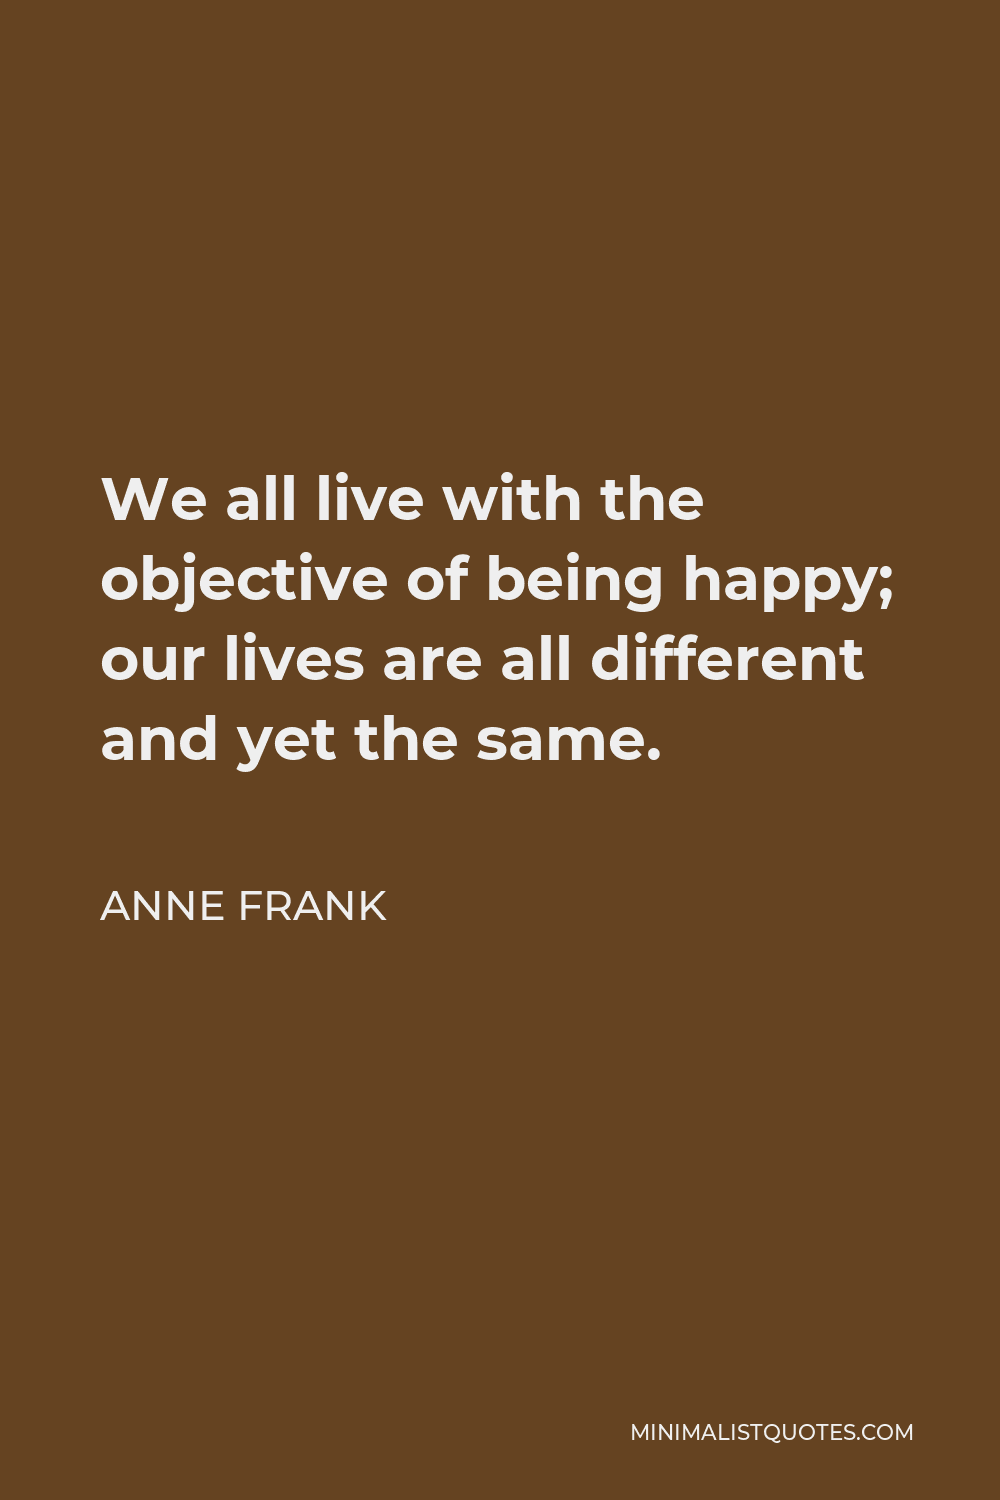 Anne Frank Quote: We all live with the objective of being happy; our ...